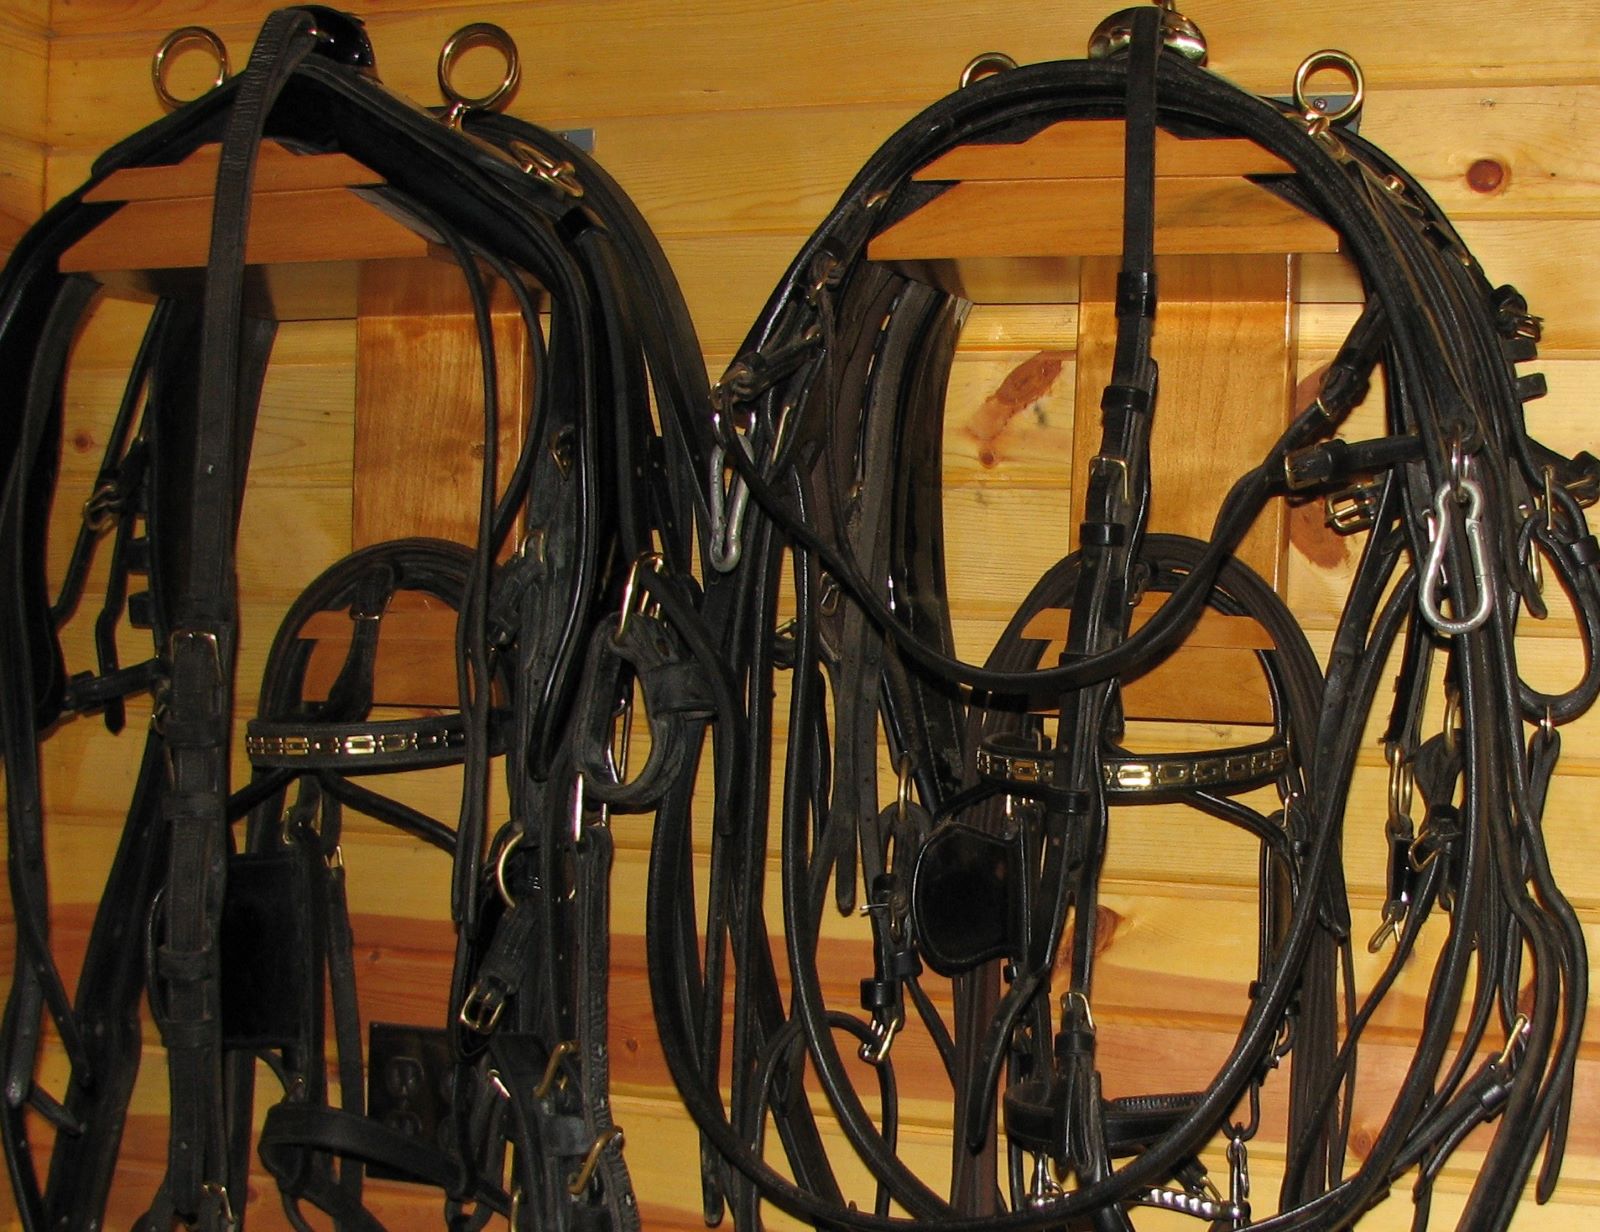 Used Horse Harness and Equipment | IVC Carriage